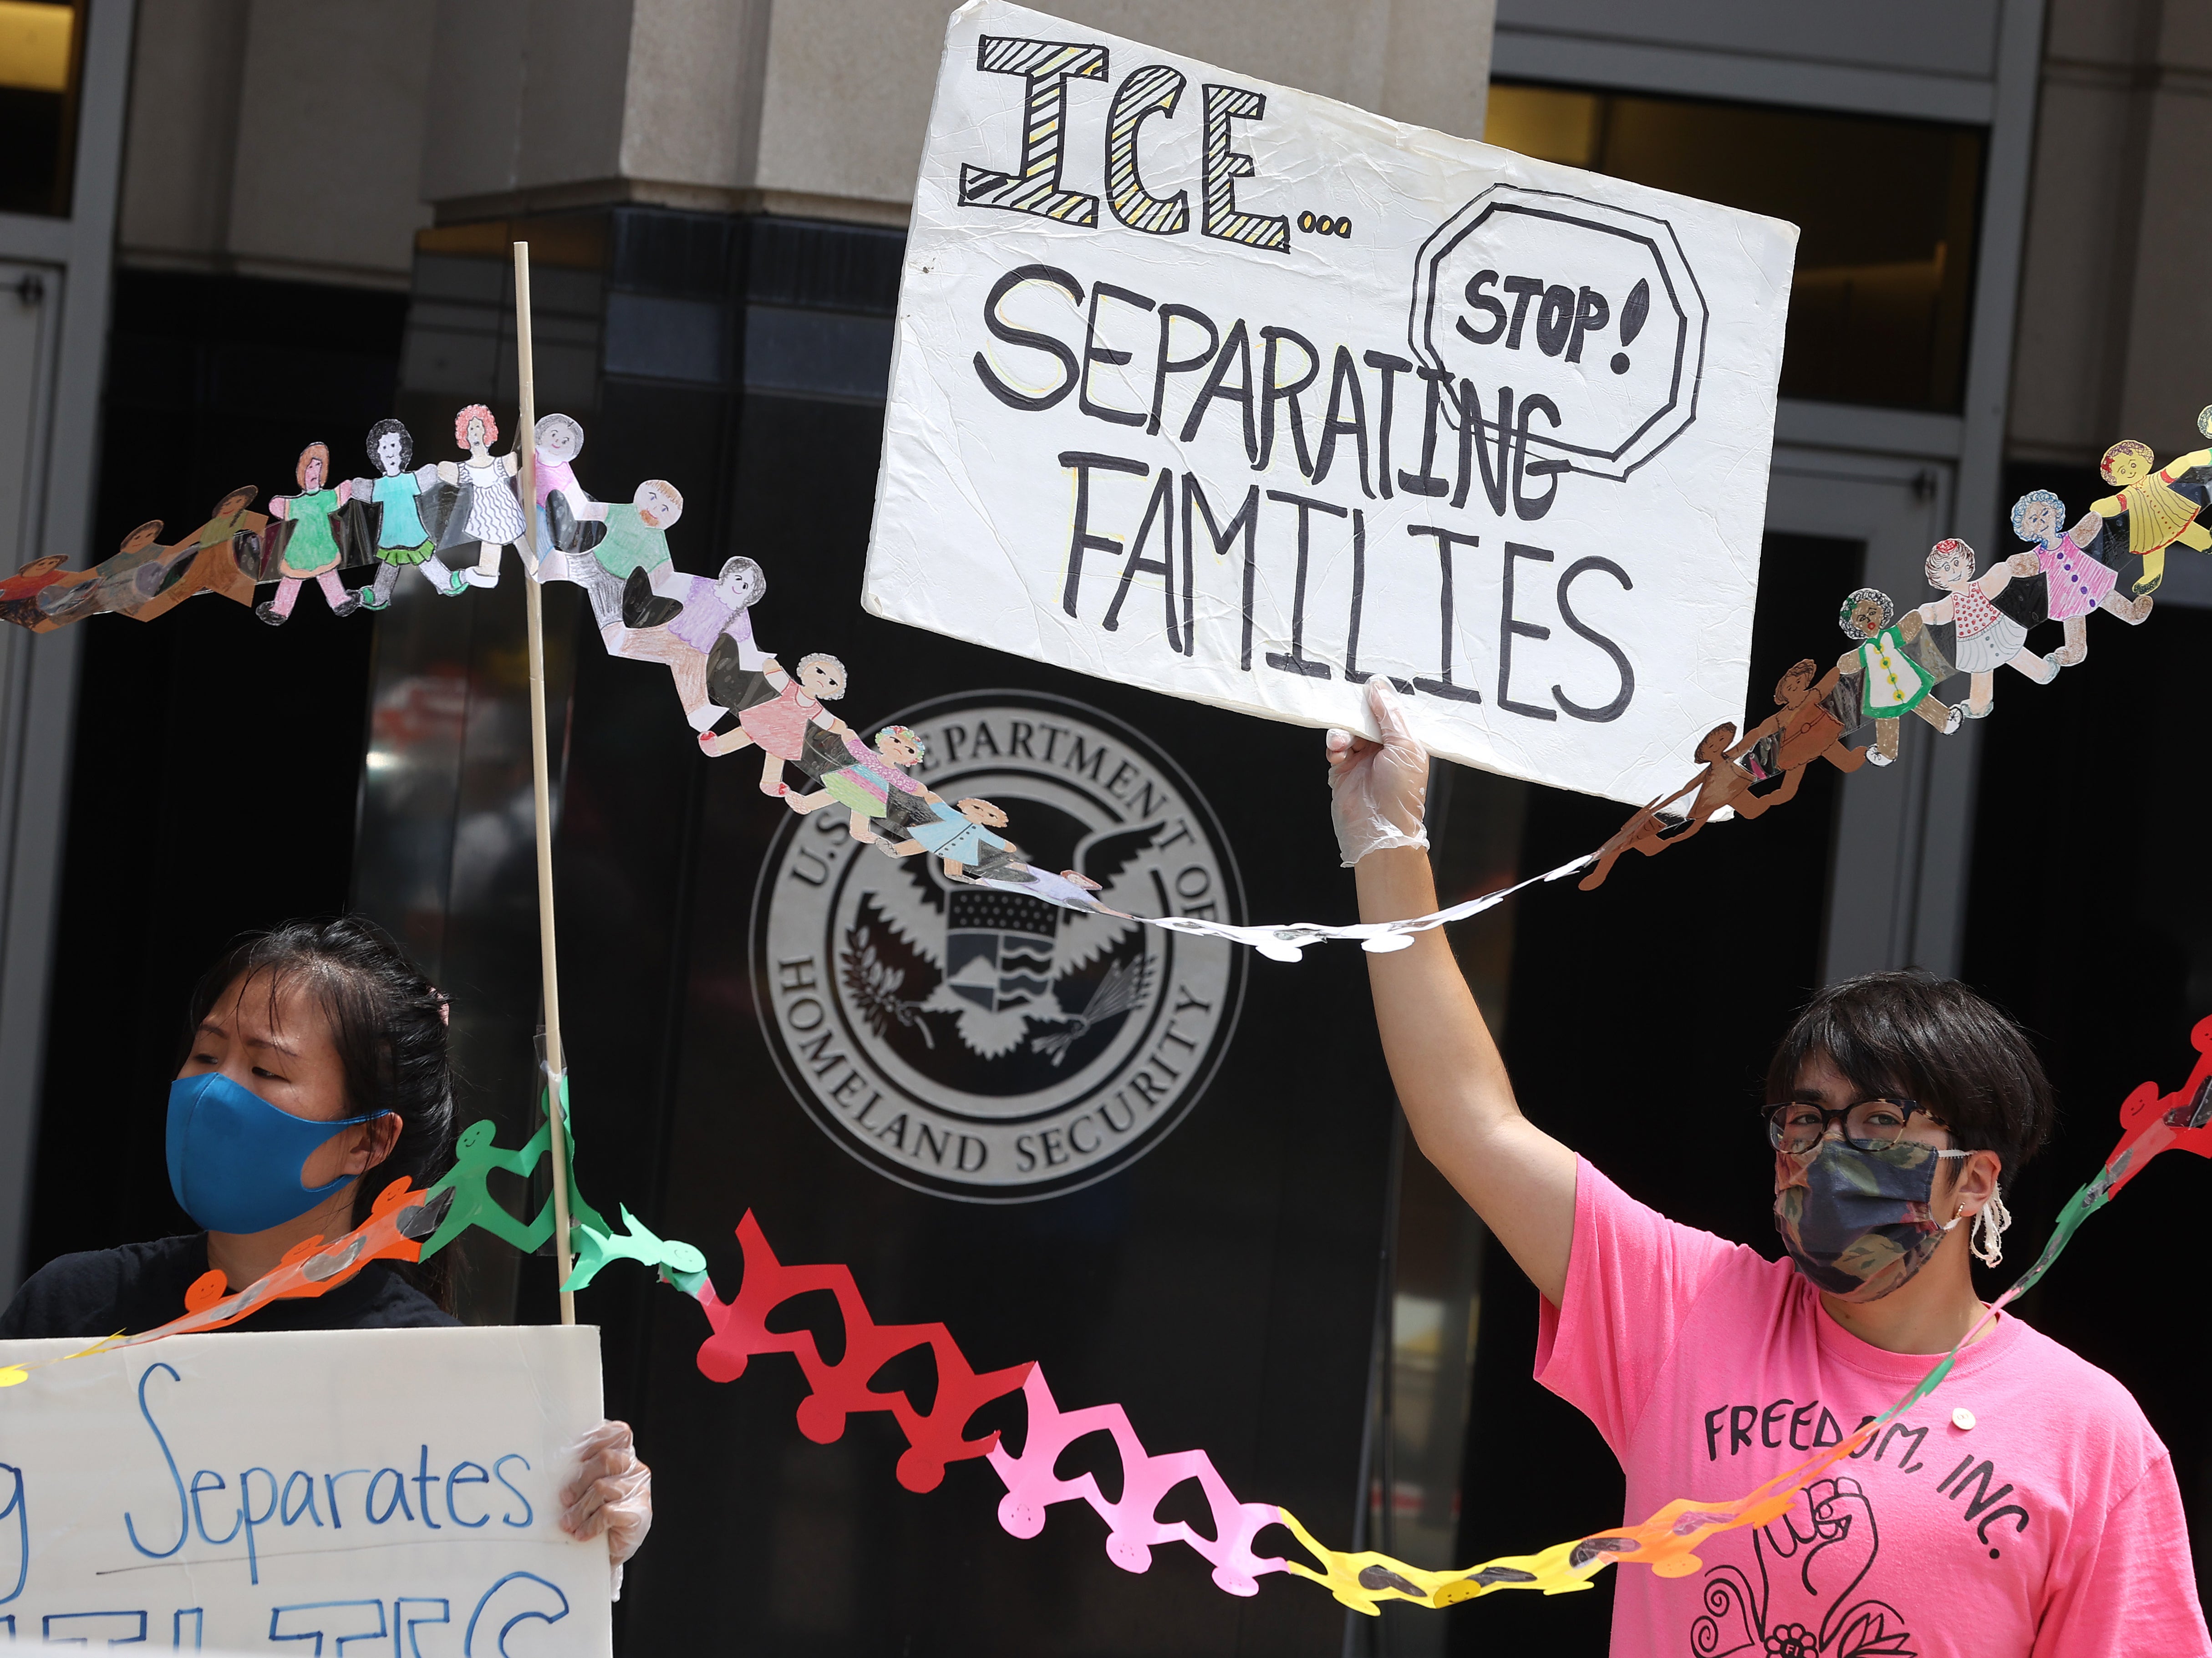 Protesters rally in front of the U.S. Immigration and Customs Enforcement headquarters, demanding the release of immigrants in ICE detention due to the dangers posed by the coronavirus pandemic July 17, 2020 in Washington, DC.&nbsp;